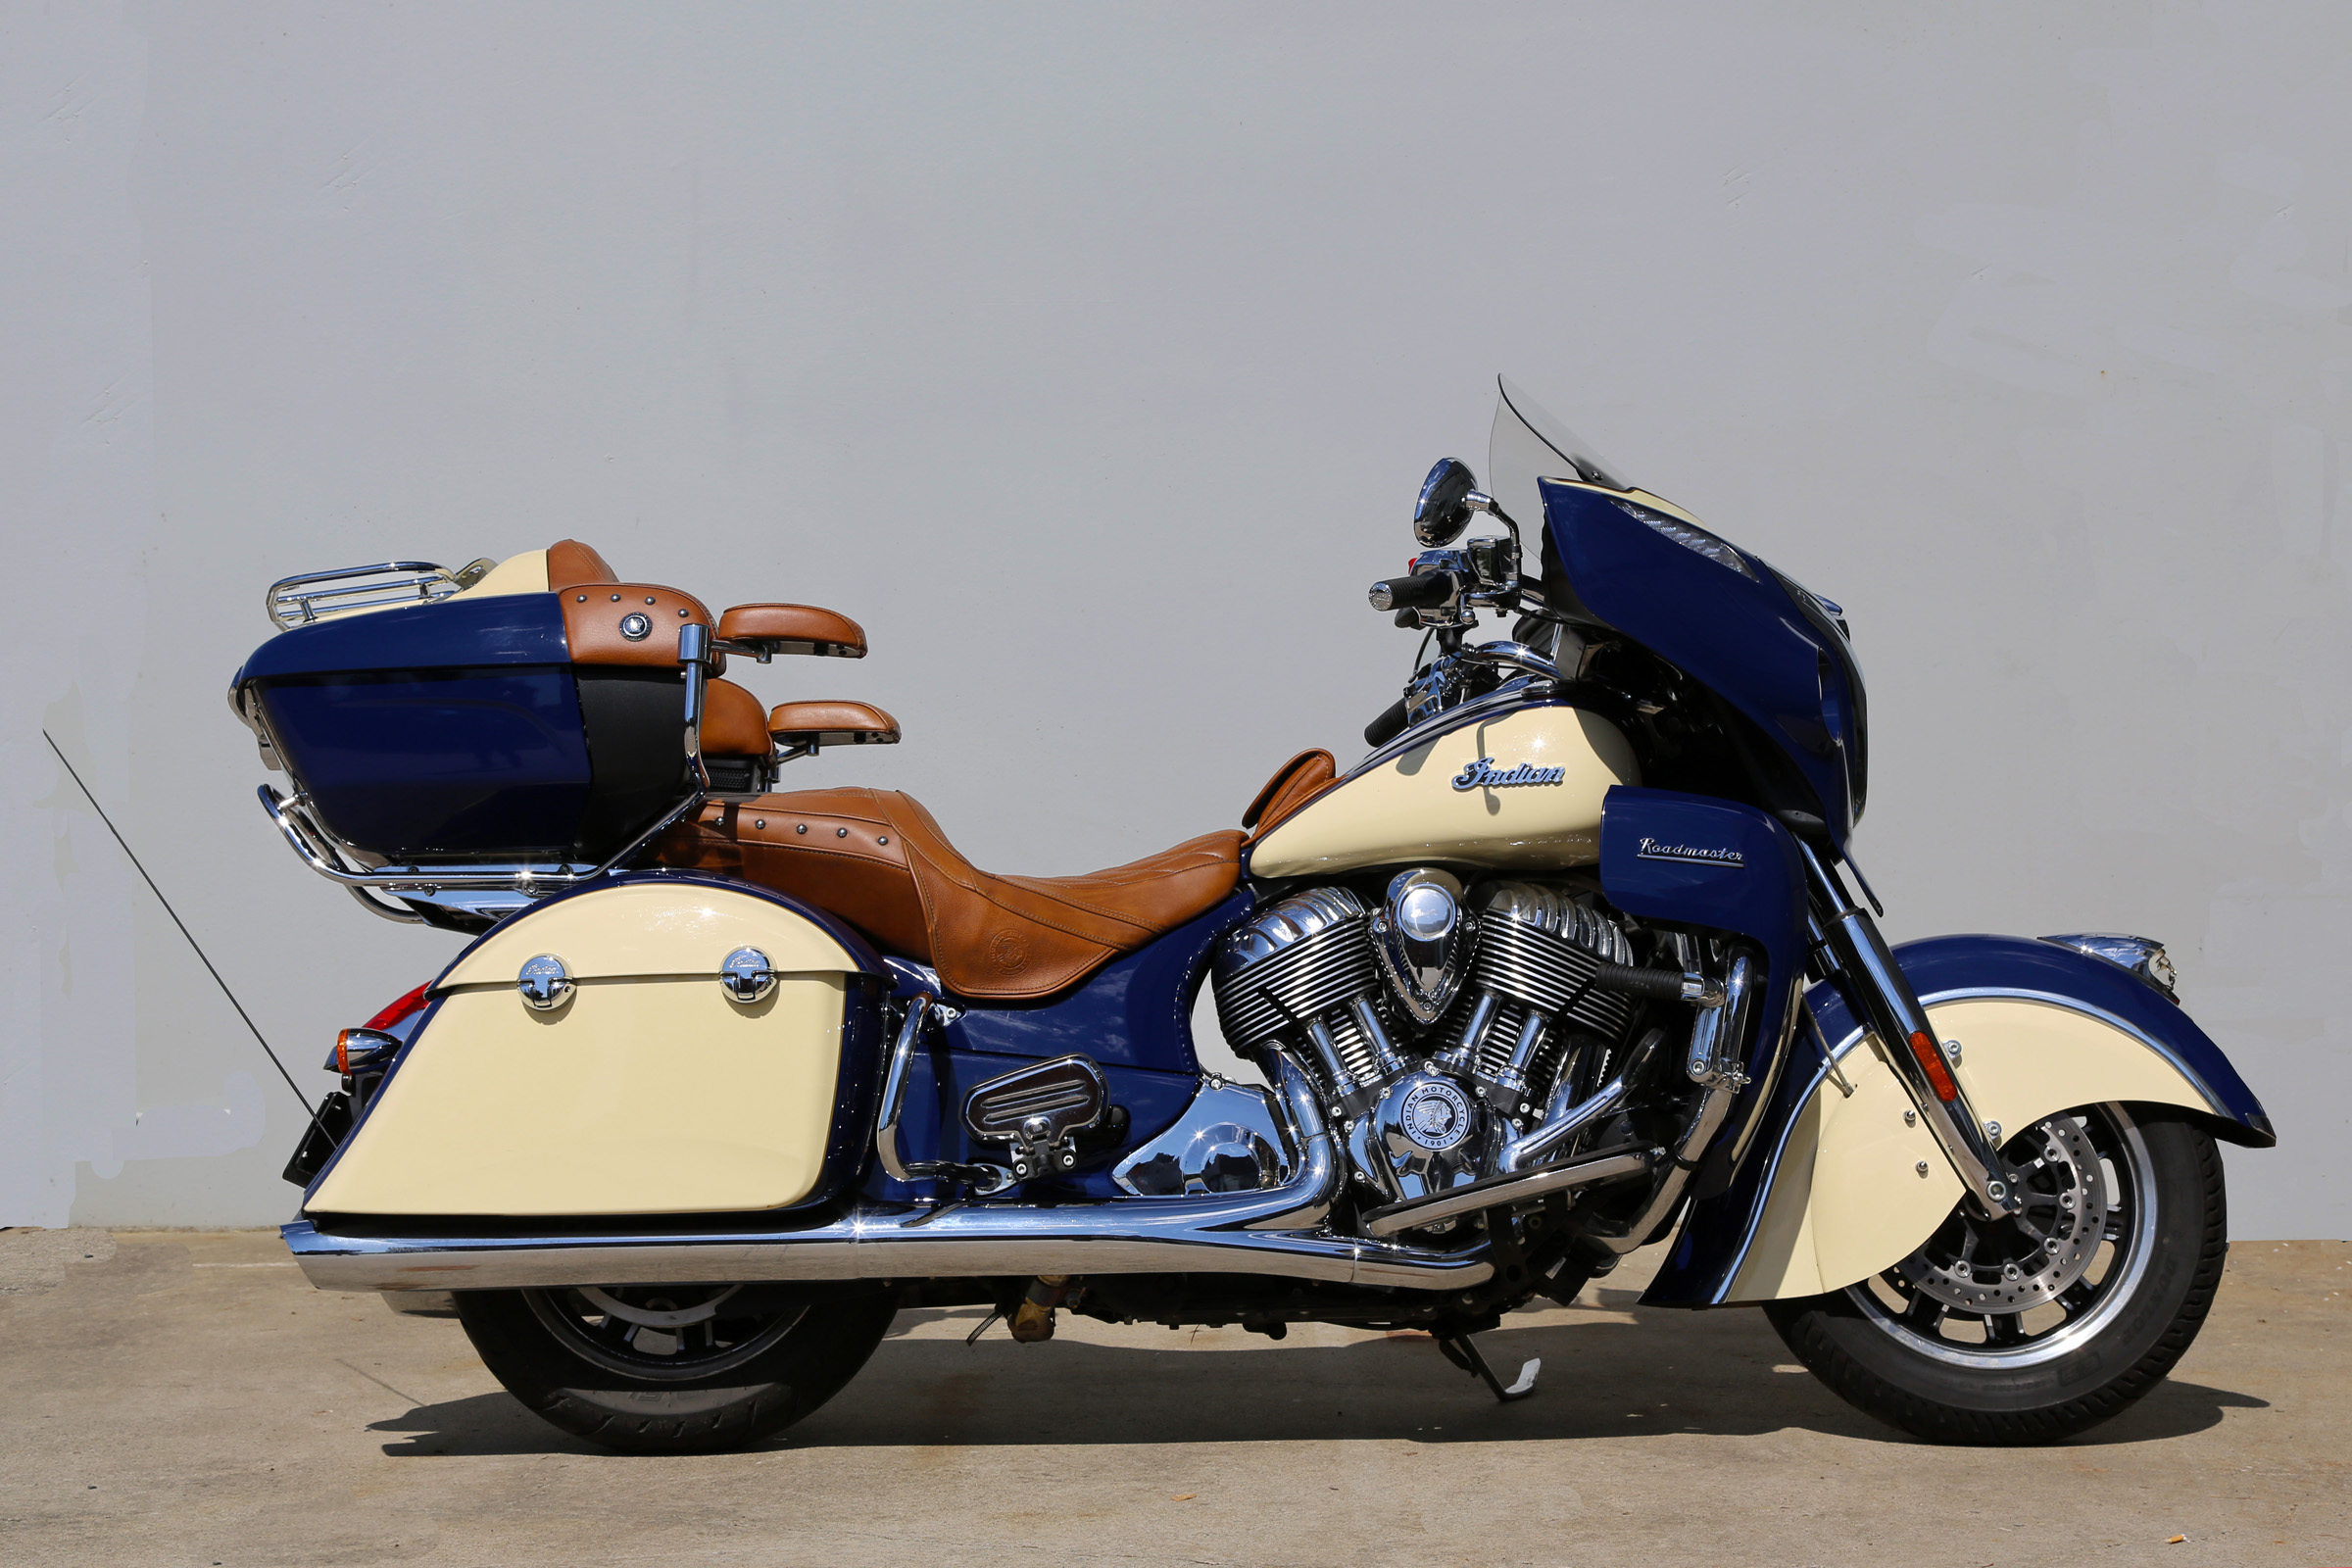 2016 Indian Roadmaster crs